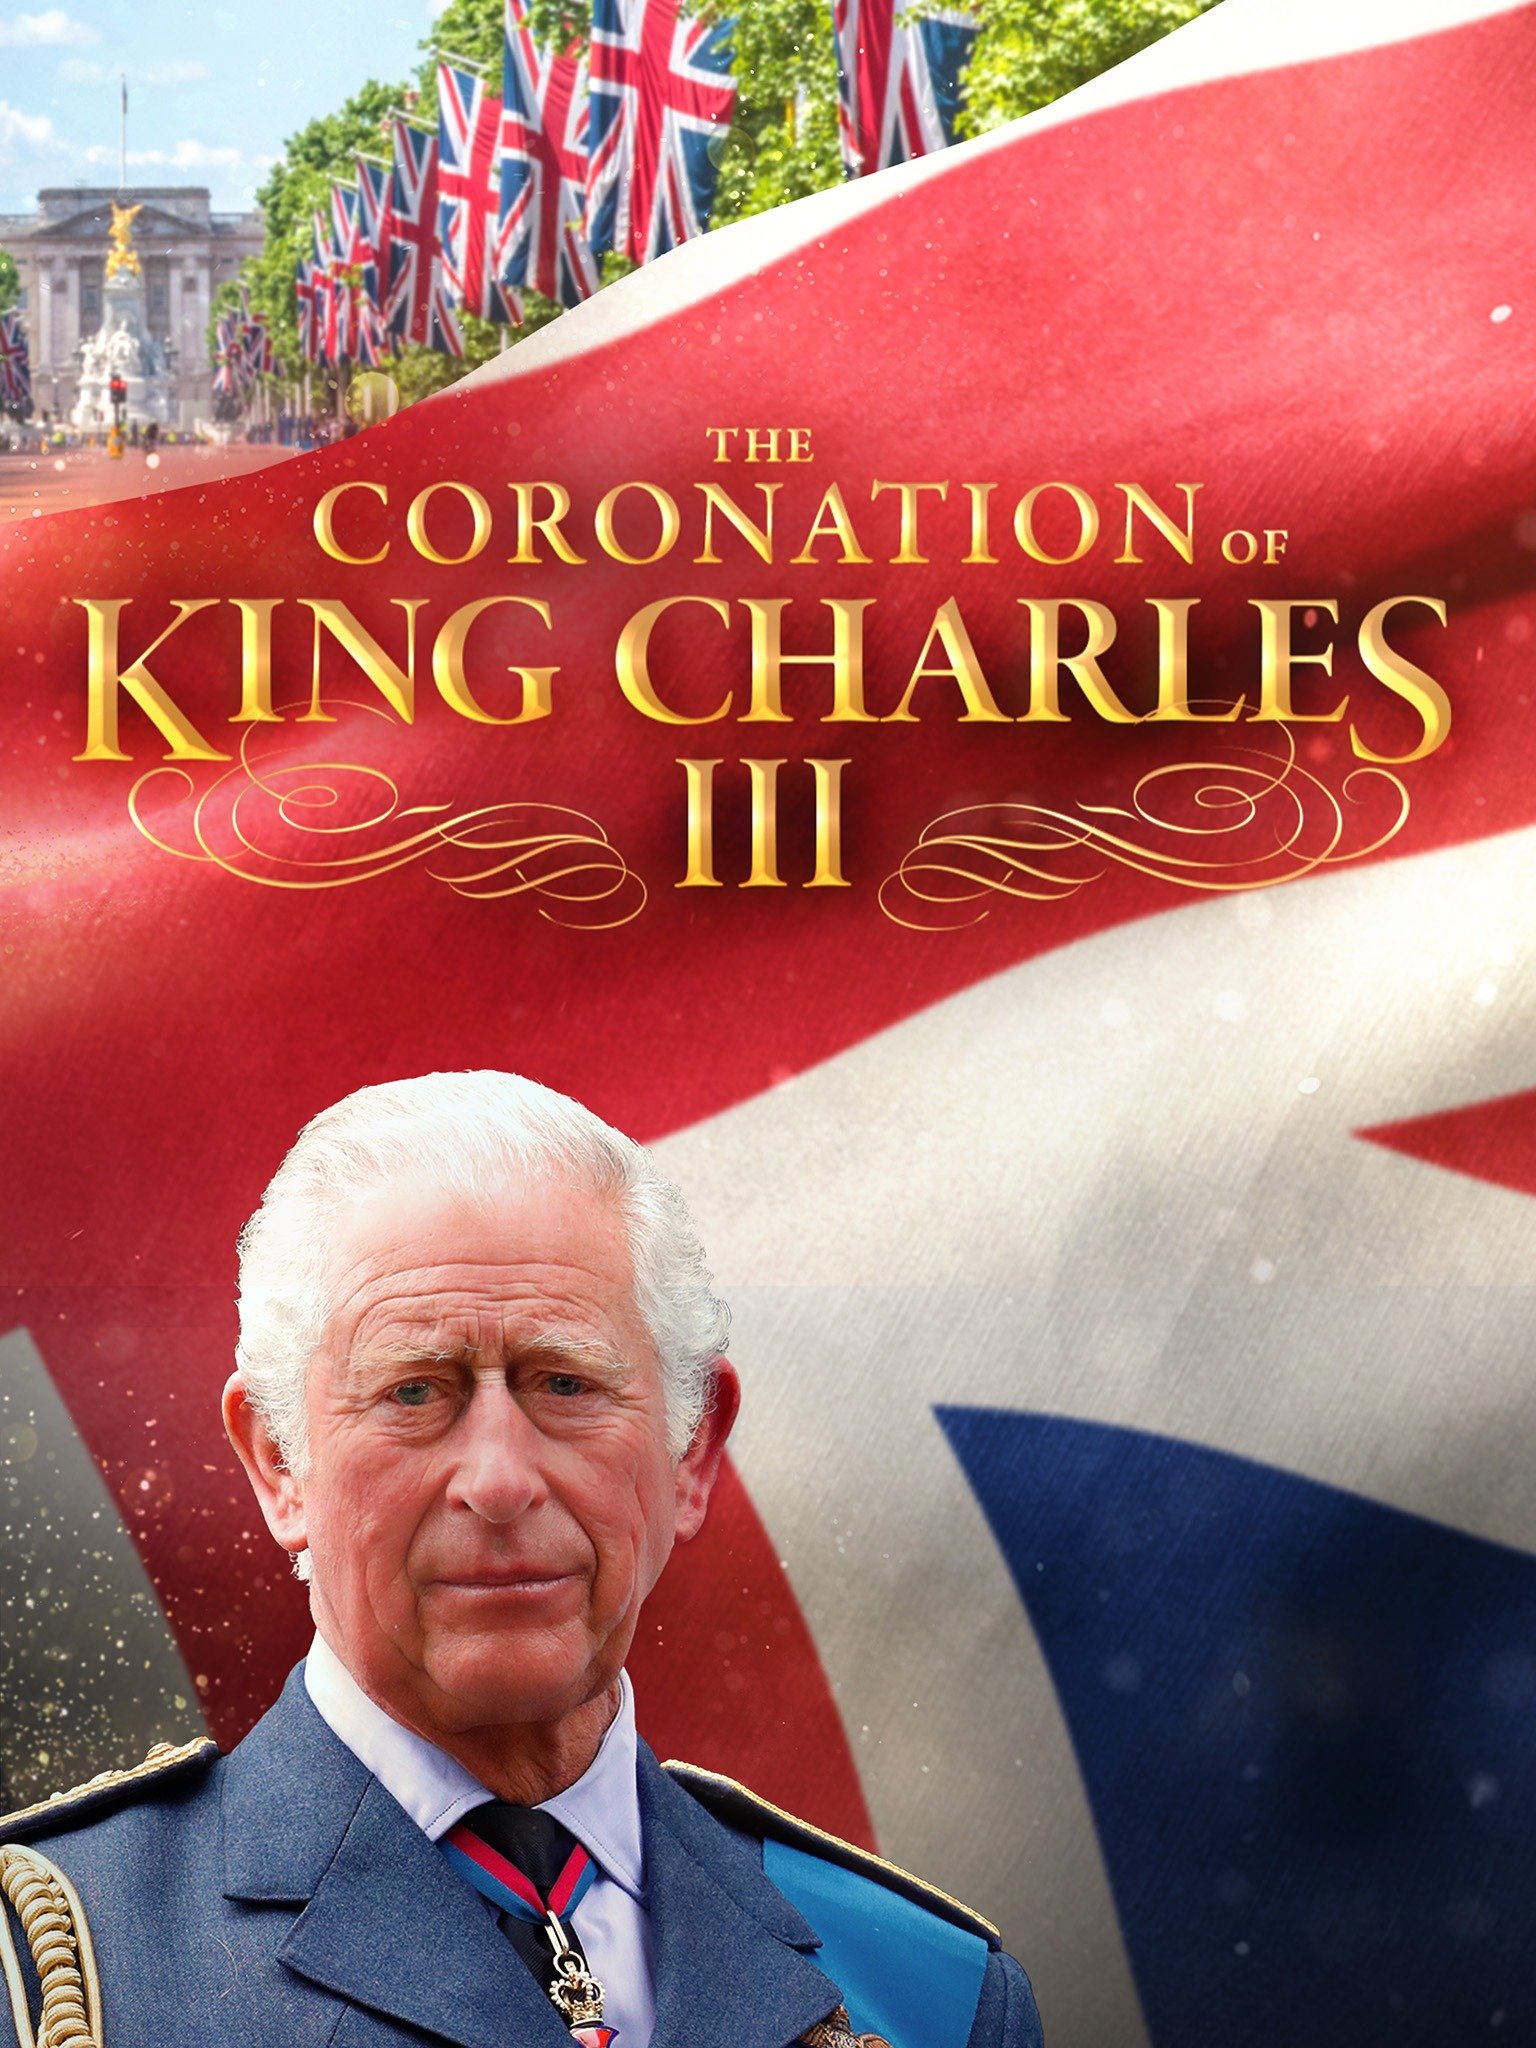 NBC News Special: The Coronation of King Charles III May 6 2023 on NBC ...